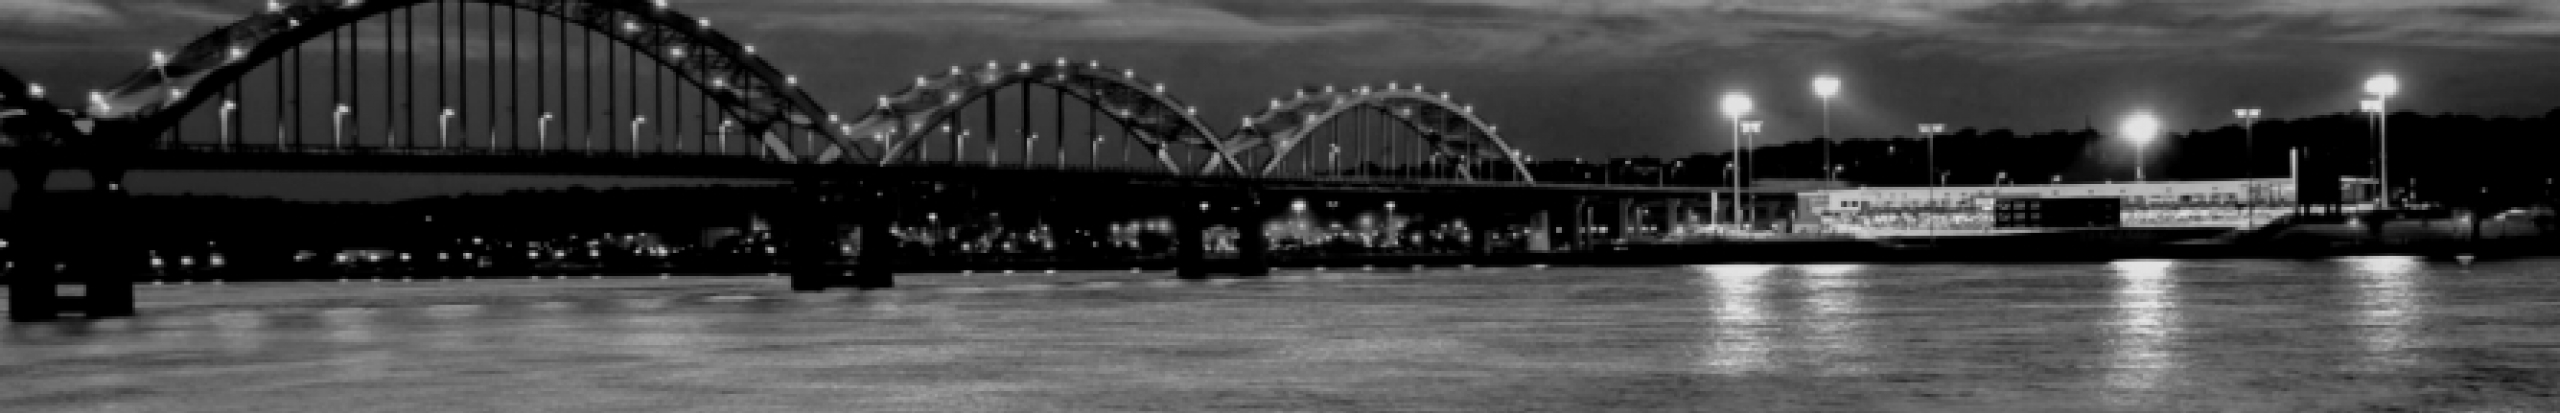 Black and white image of the Centennial bridge over the Mississippi River